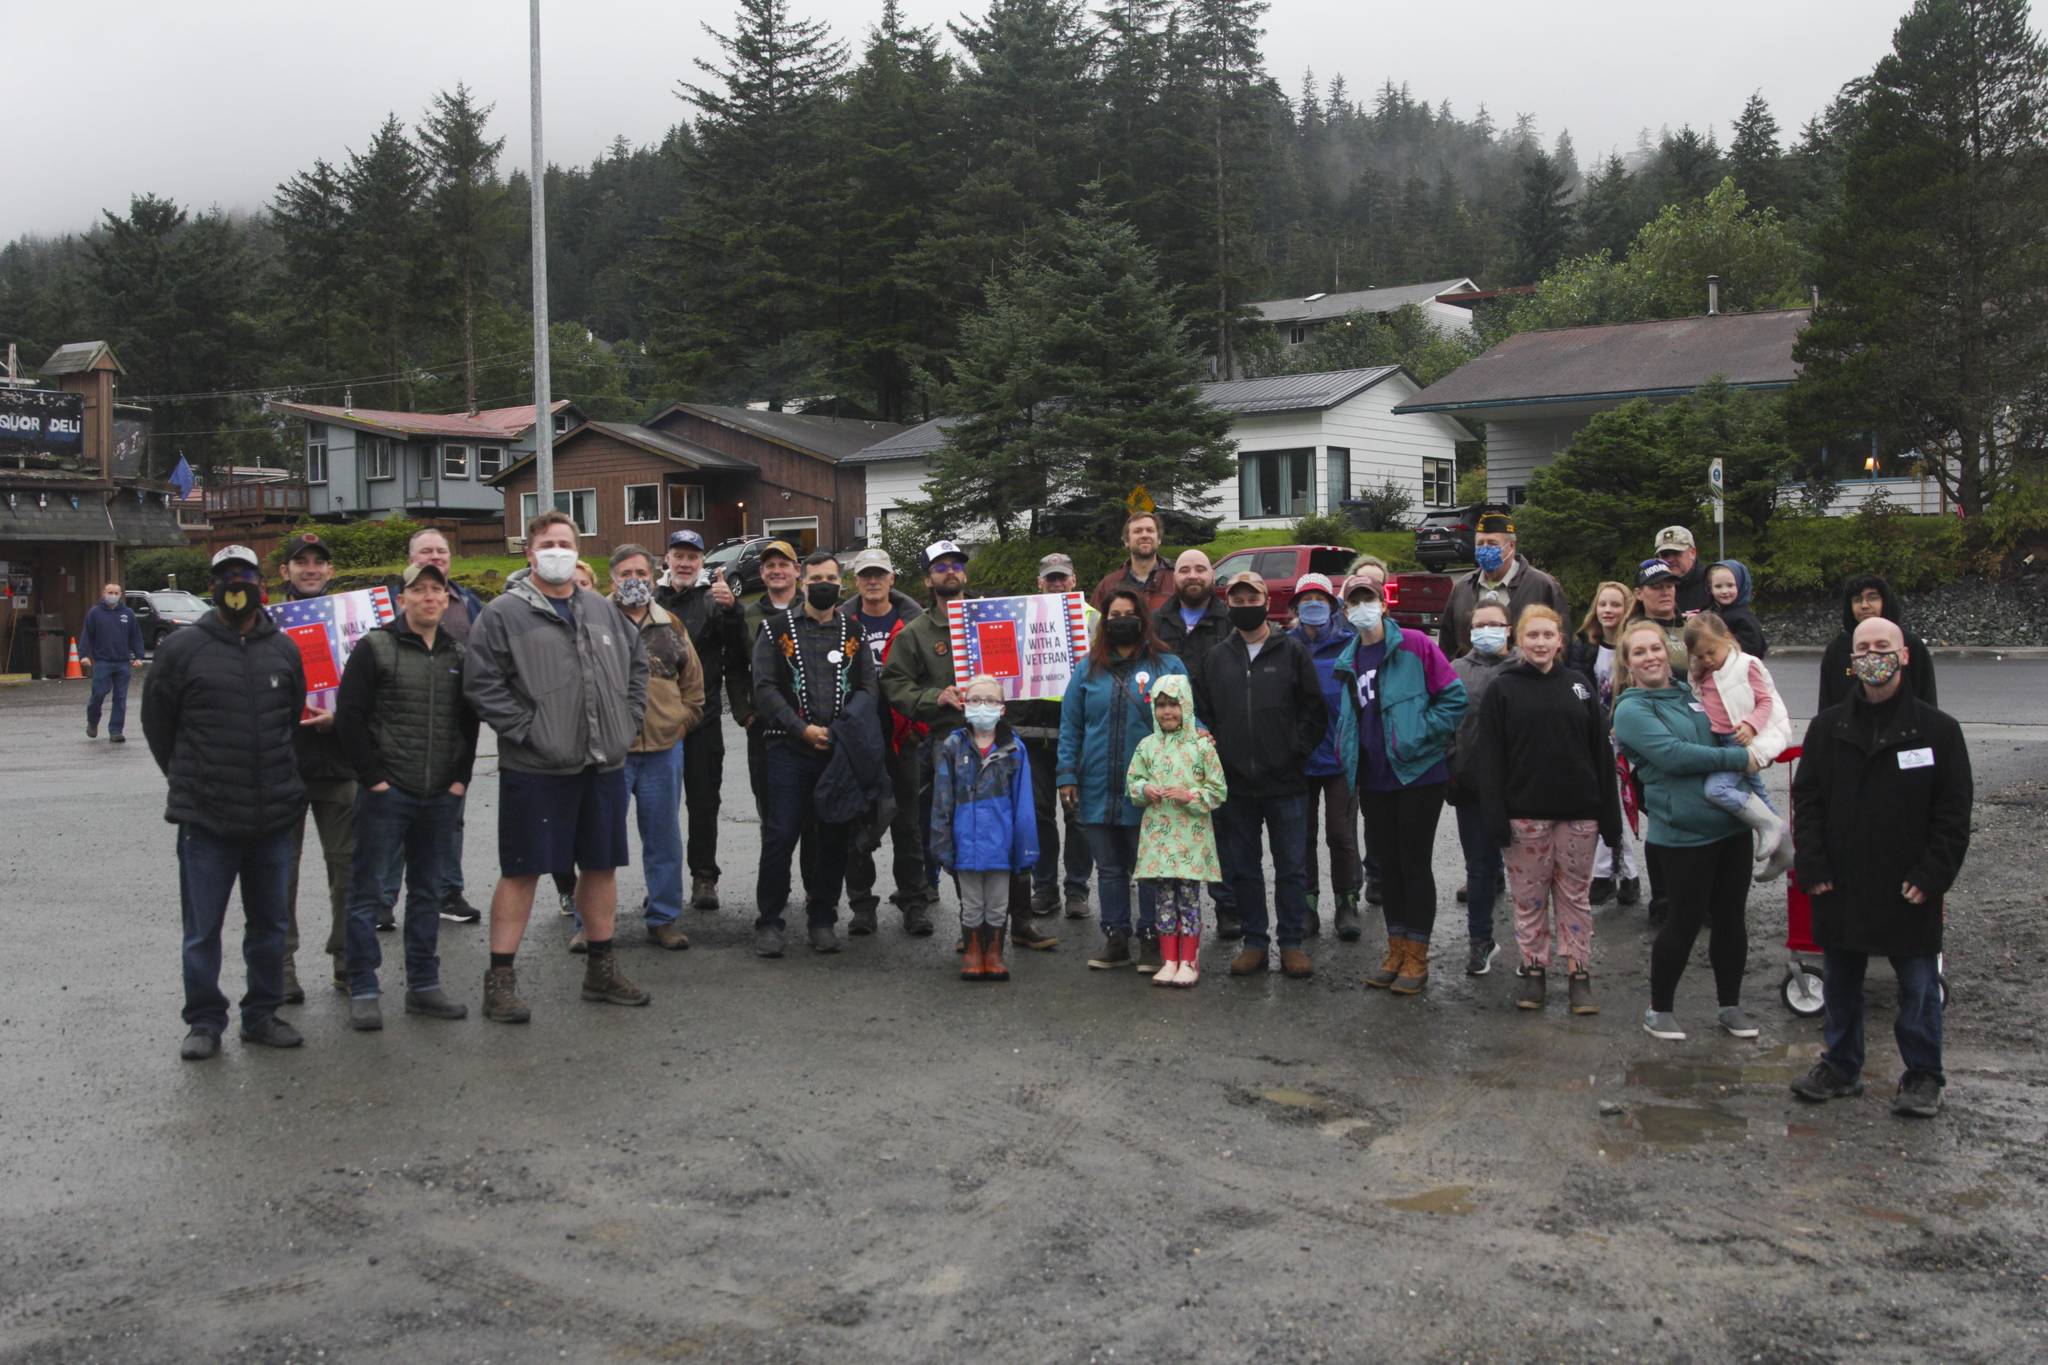 Juneau residents and veterans gathered on Tuesday, Aug. 24, 2021 for Together with Juneau Veterans’ first Walk with a Vet event across the Douglas Bridge. (Michael S. Lockett / Juneau Empire)